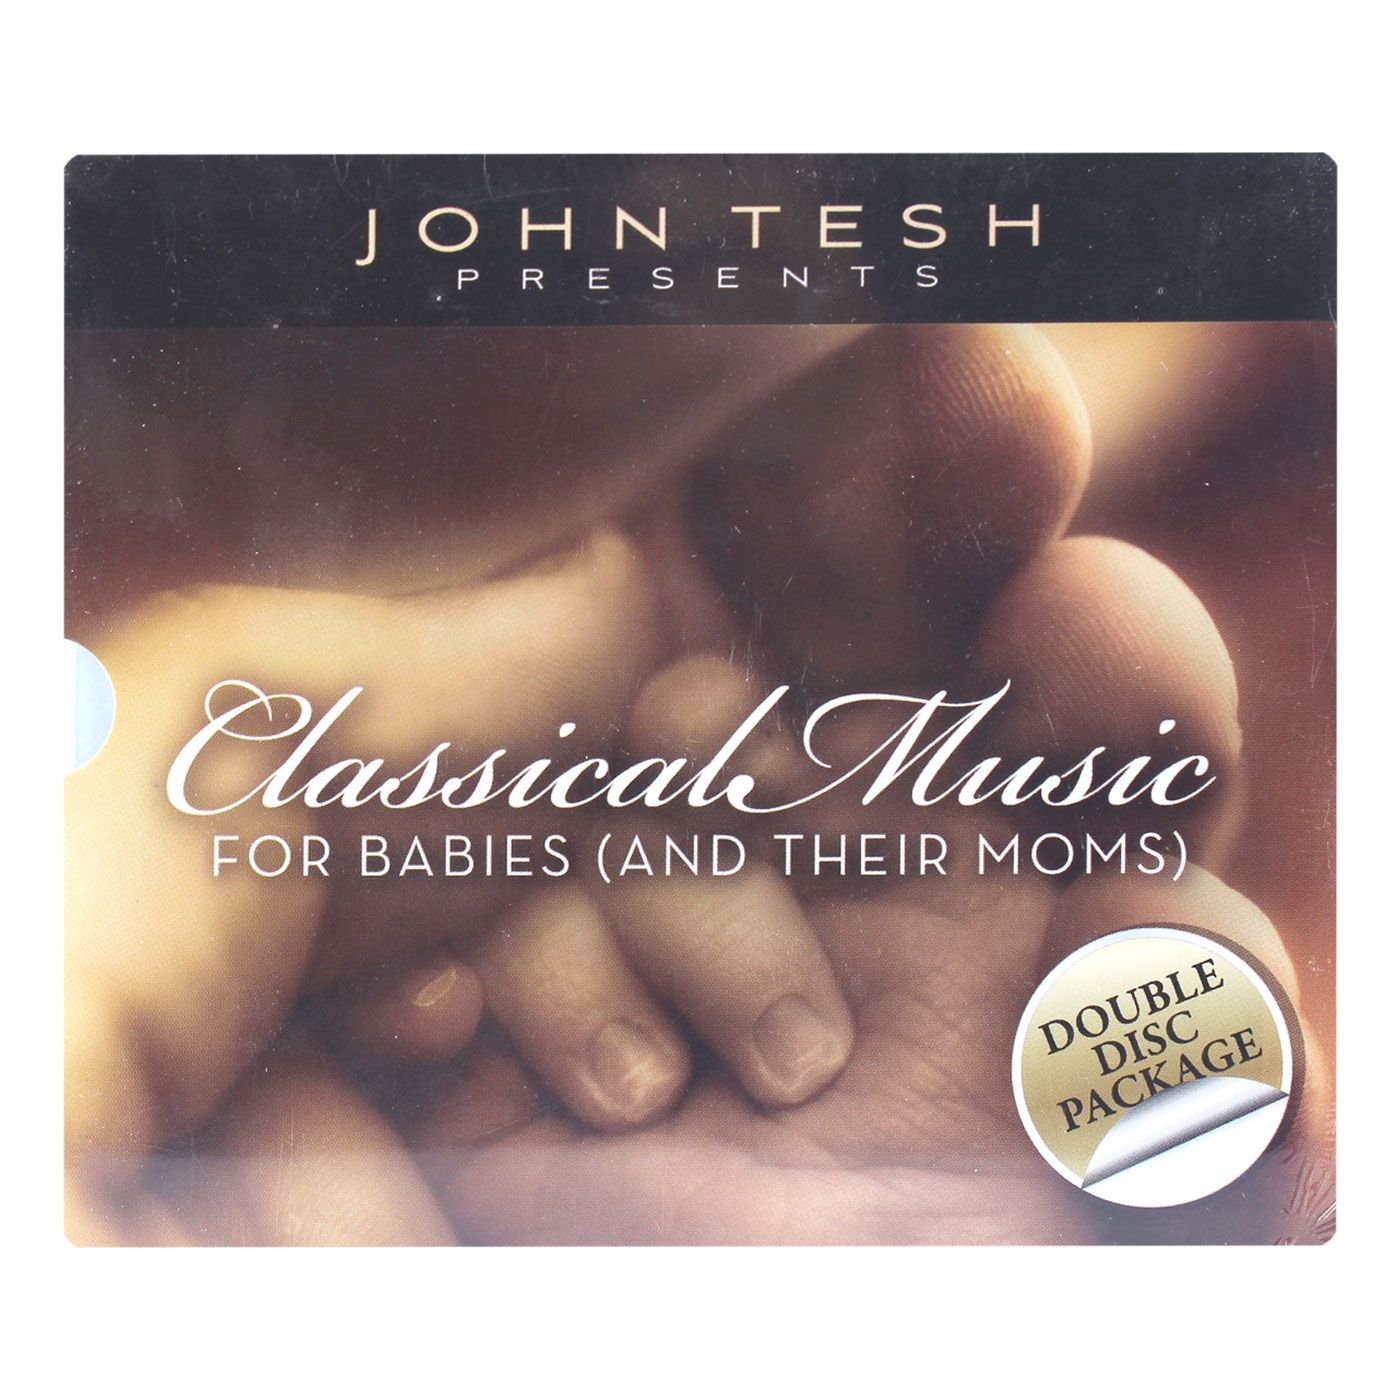 EMI CMG Classical Music For Babies And Their Moms Package - 1